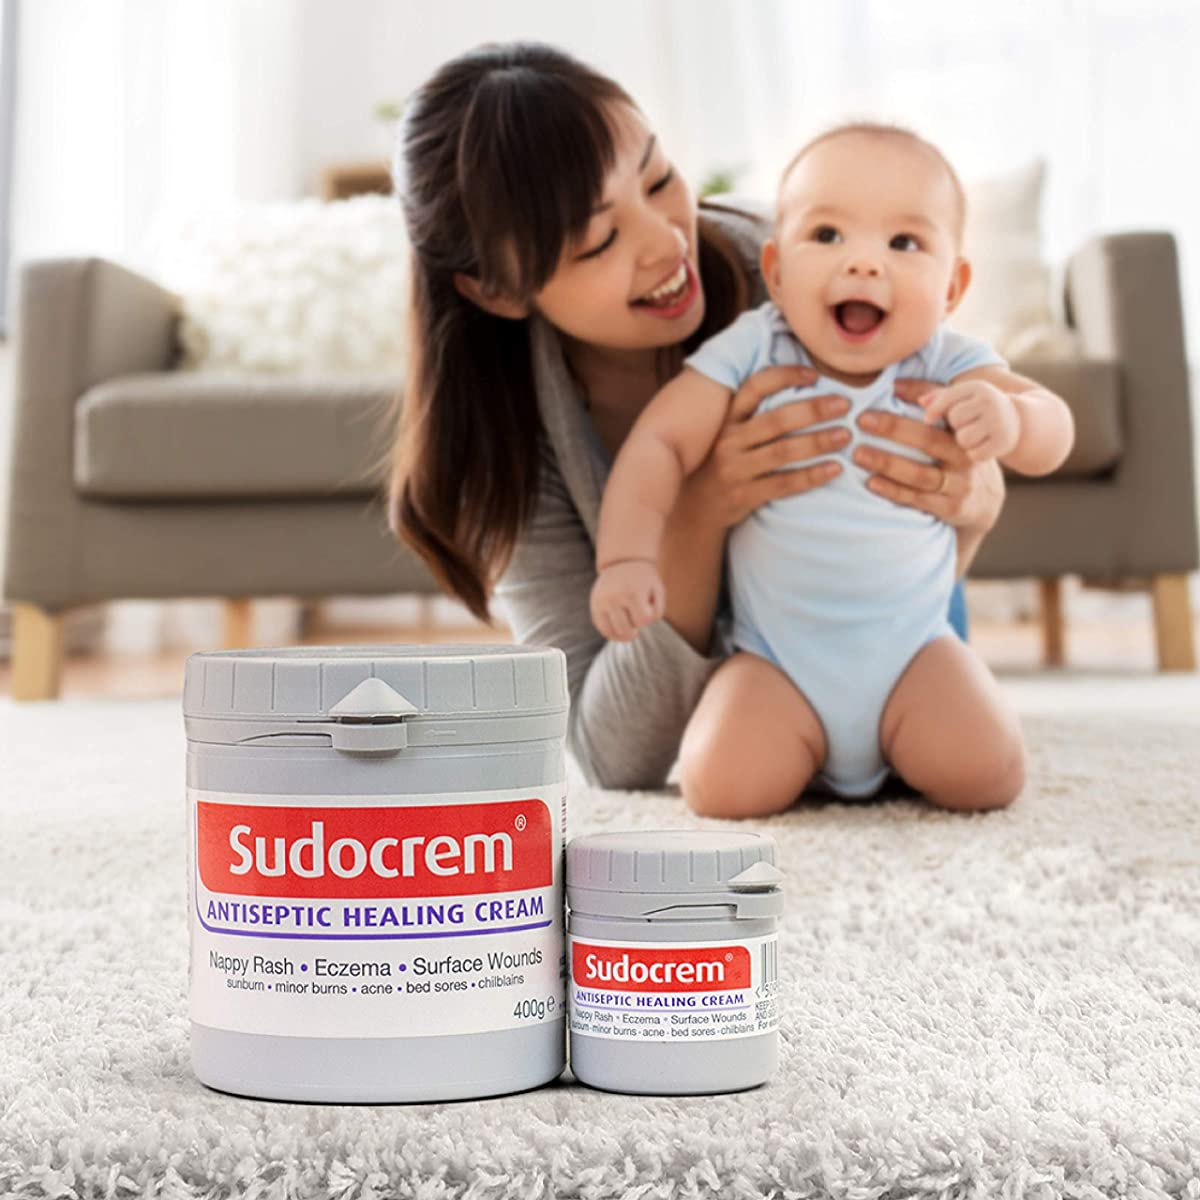 Sudocrem - Diaper Rash Cream for Baby, Soothes, Heals, and